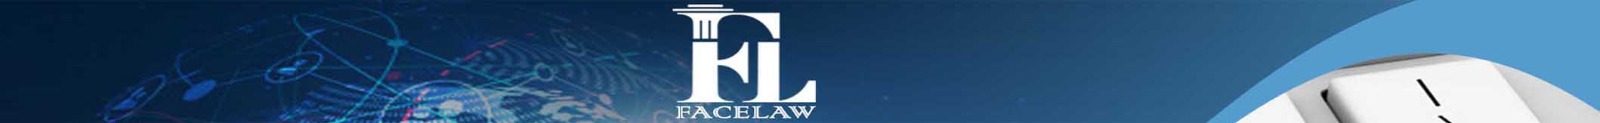 list of lawyers in canada